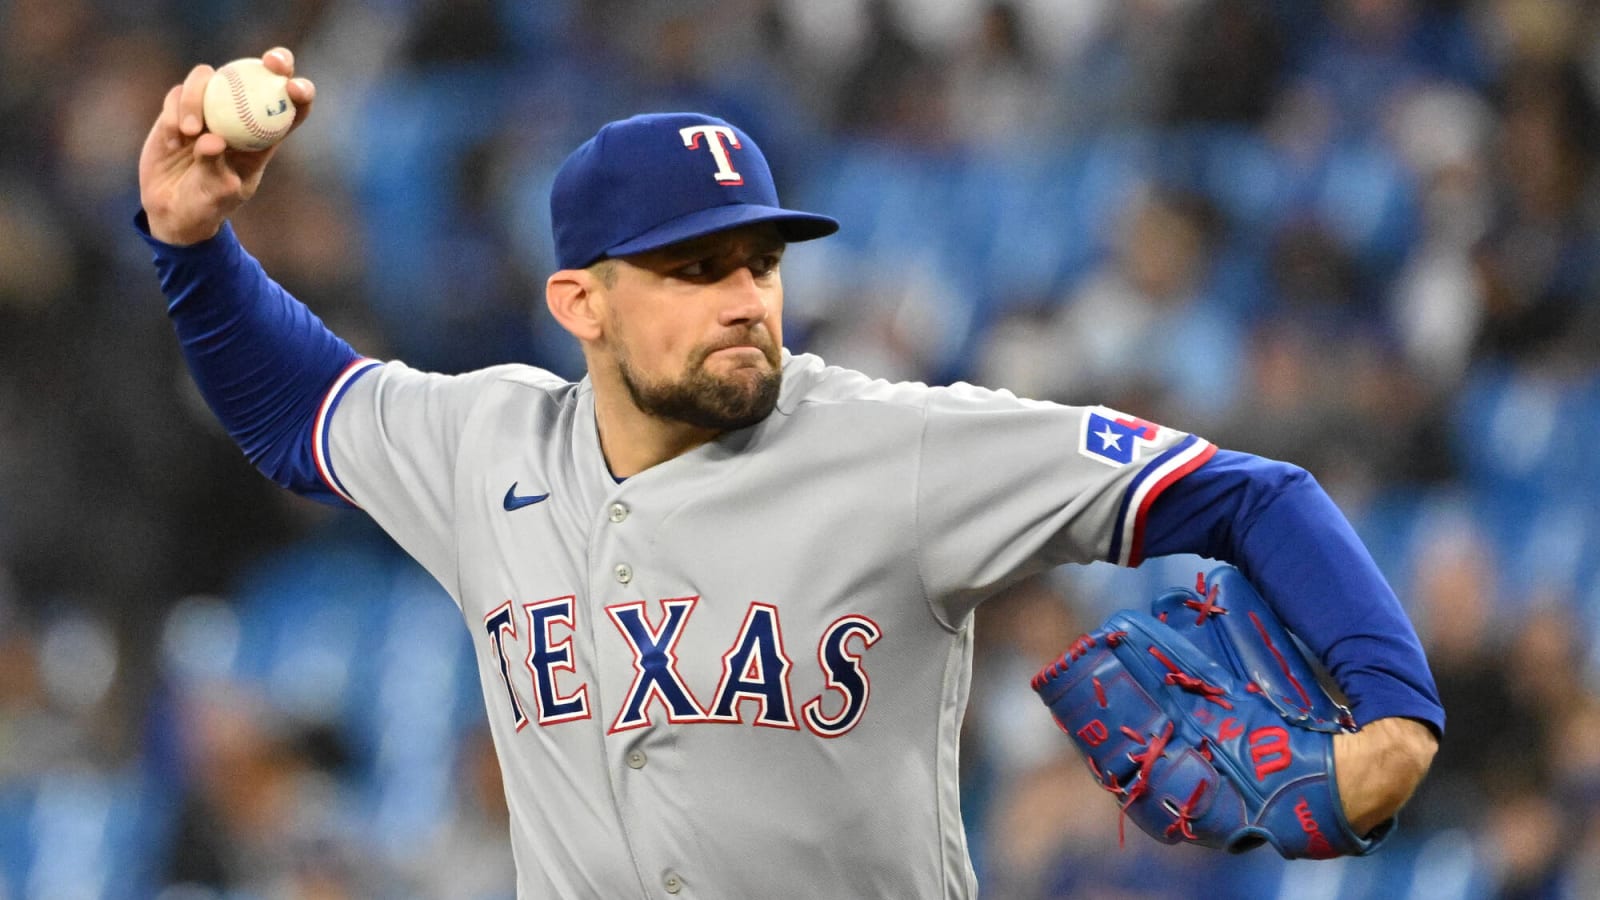 MLB Playoff picks: Best bets for Astros vs. Rangers ALCS Game 2